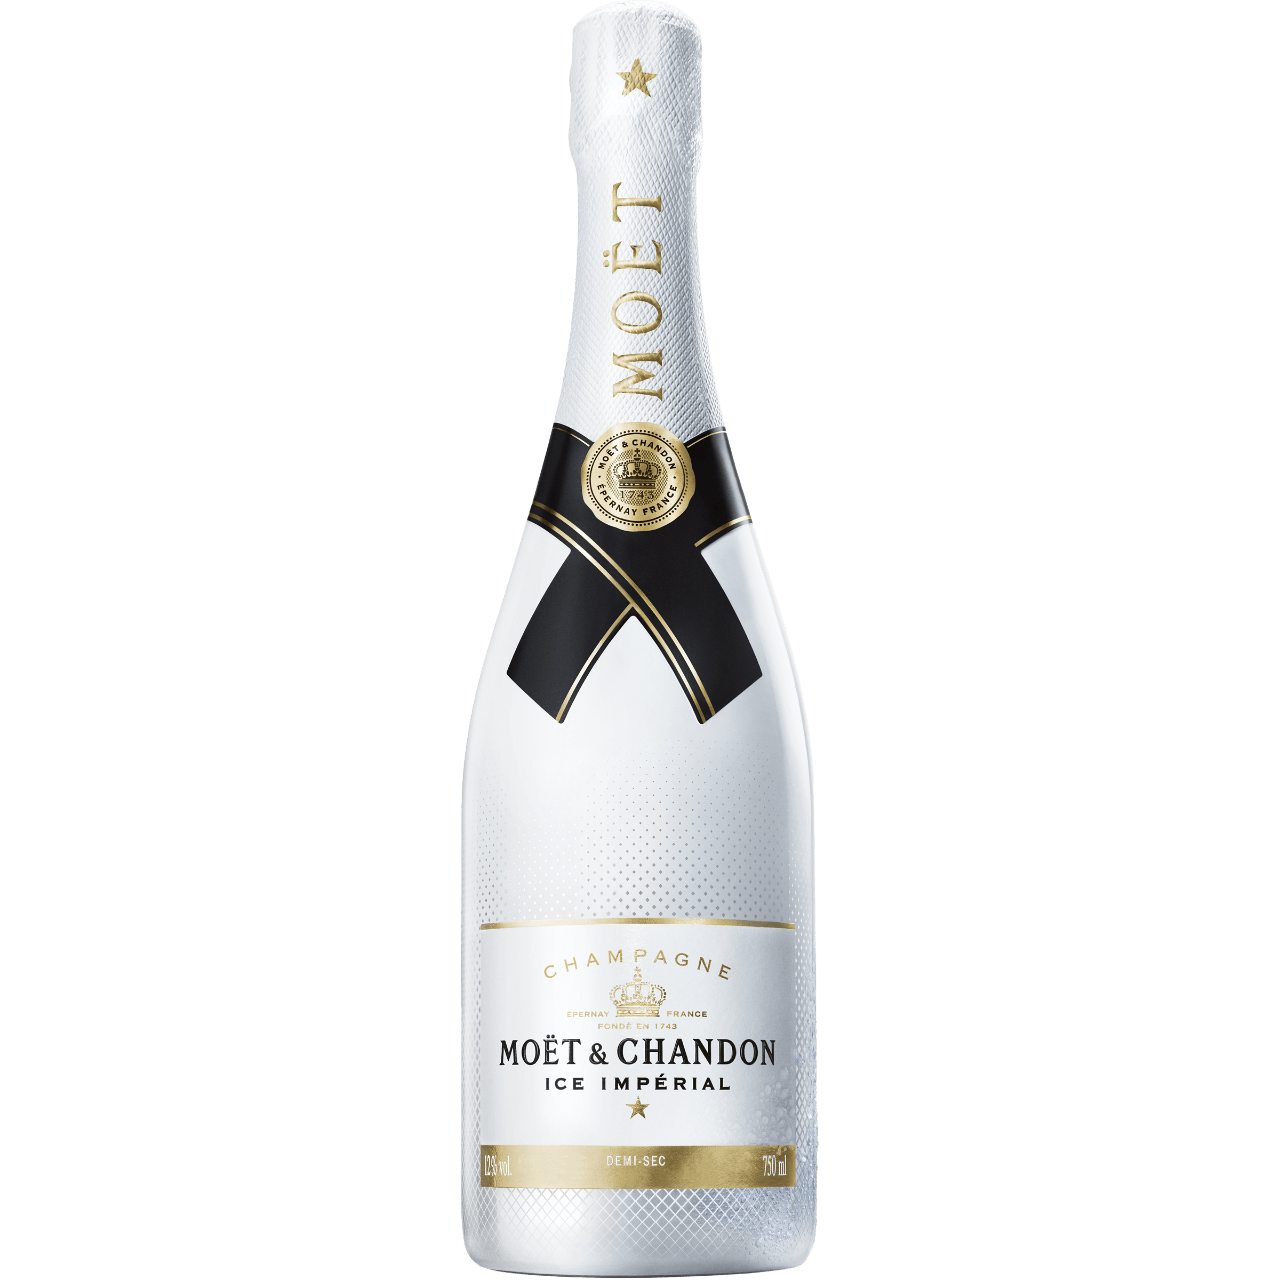 Haringen Monument Minimaal Moët & Chandon Ice Impérial champagne - Champagne Babes